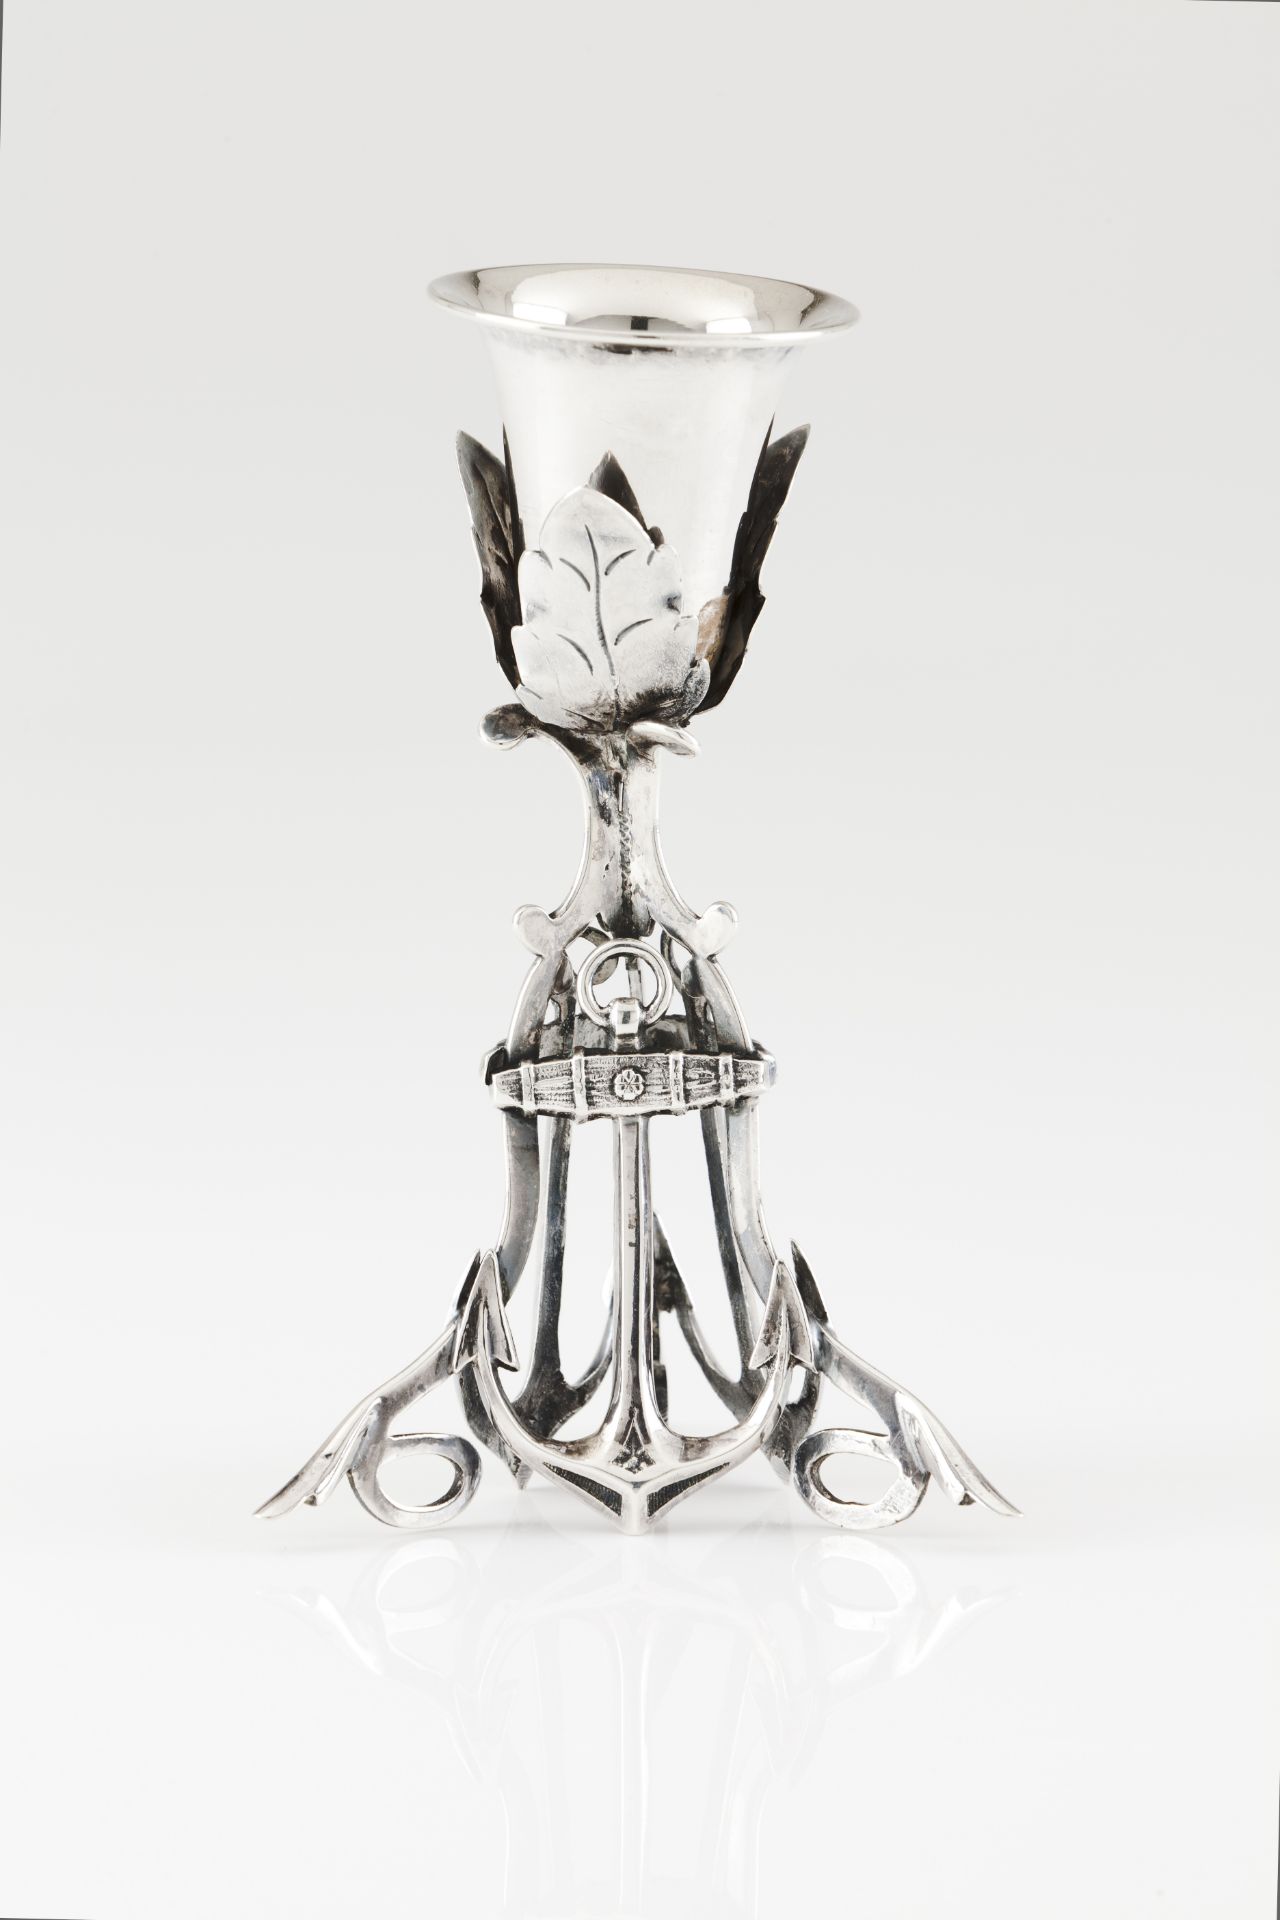 A toothpick holderPortuguese silver, 19th century Leaf shaped cup on anchor base with scroll feet